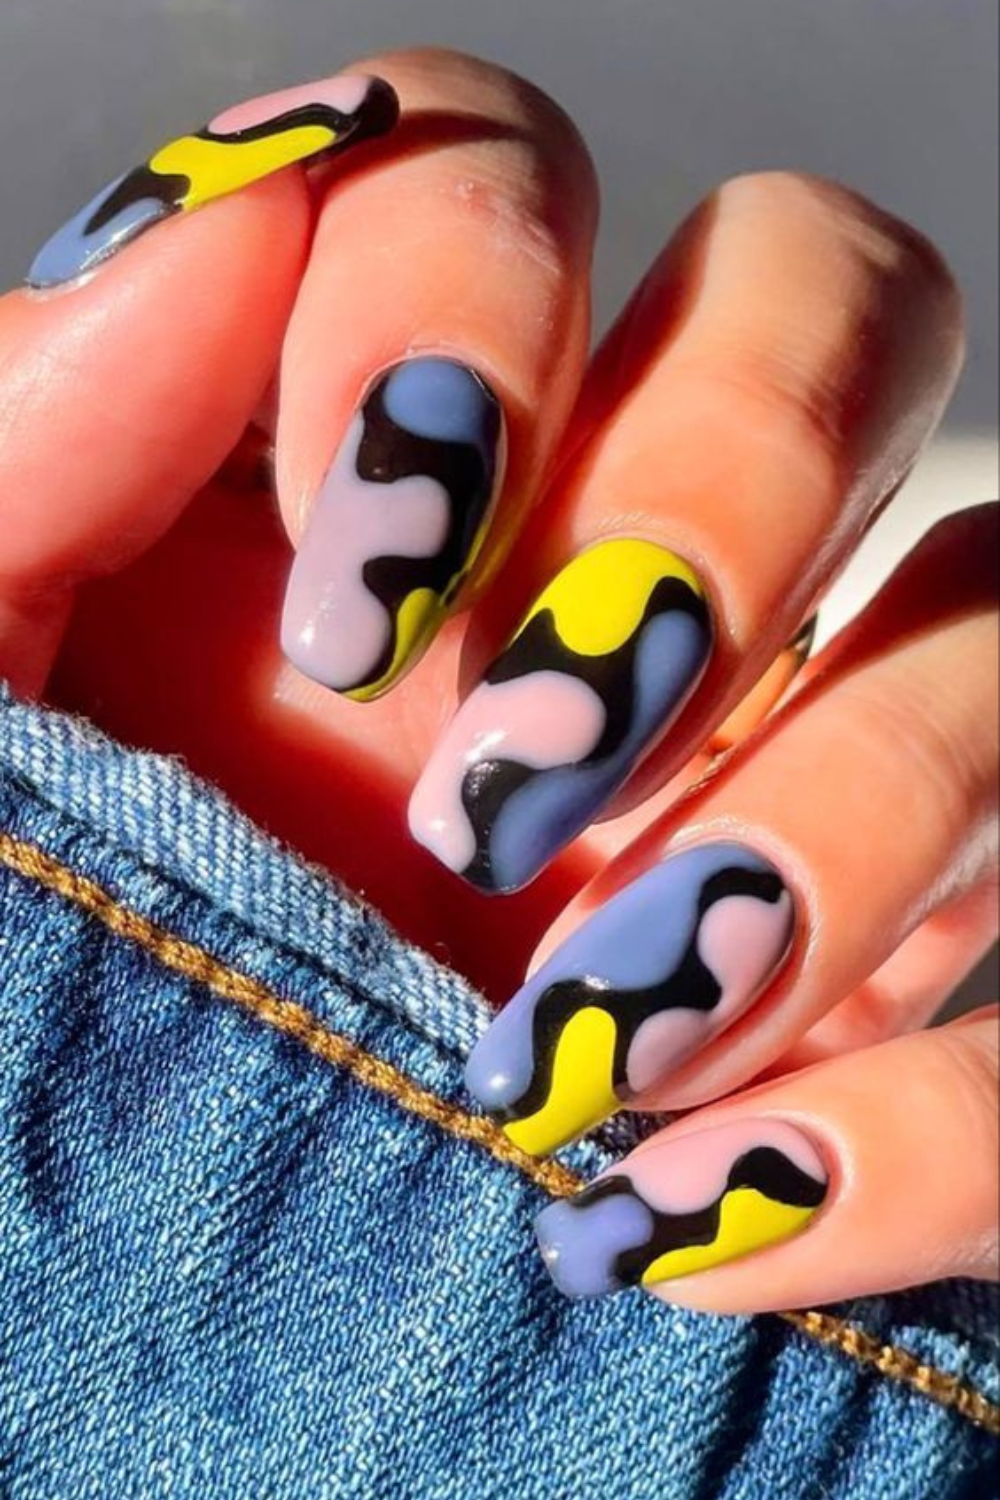 25 Chic Retro Nails We're Totally Vibin' With This Year!